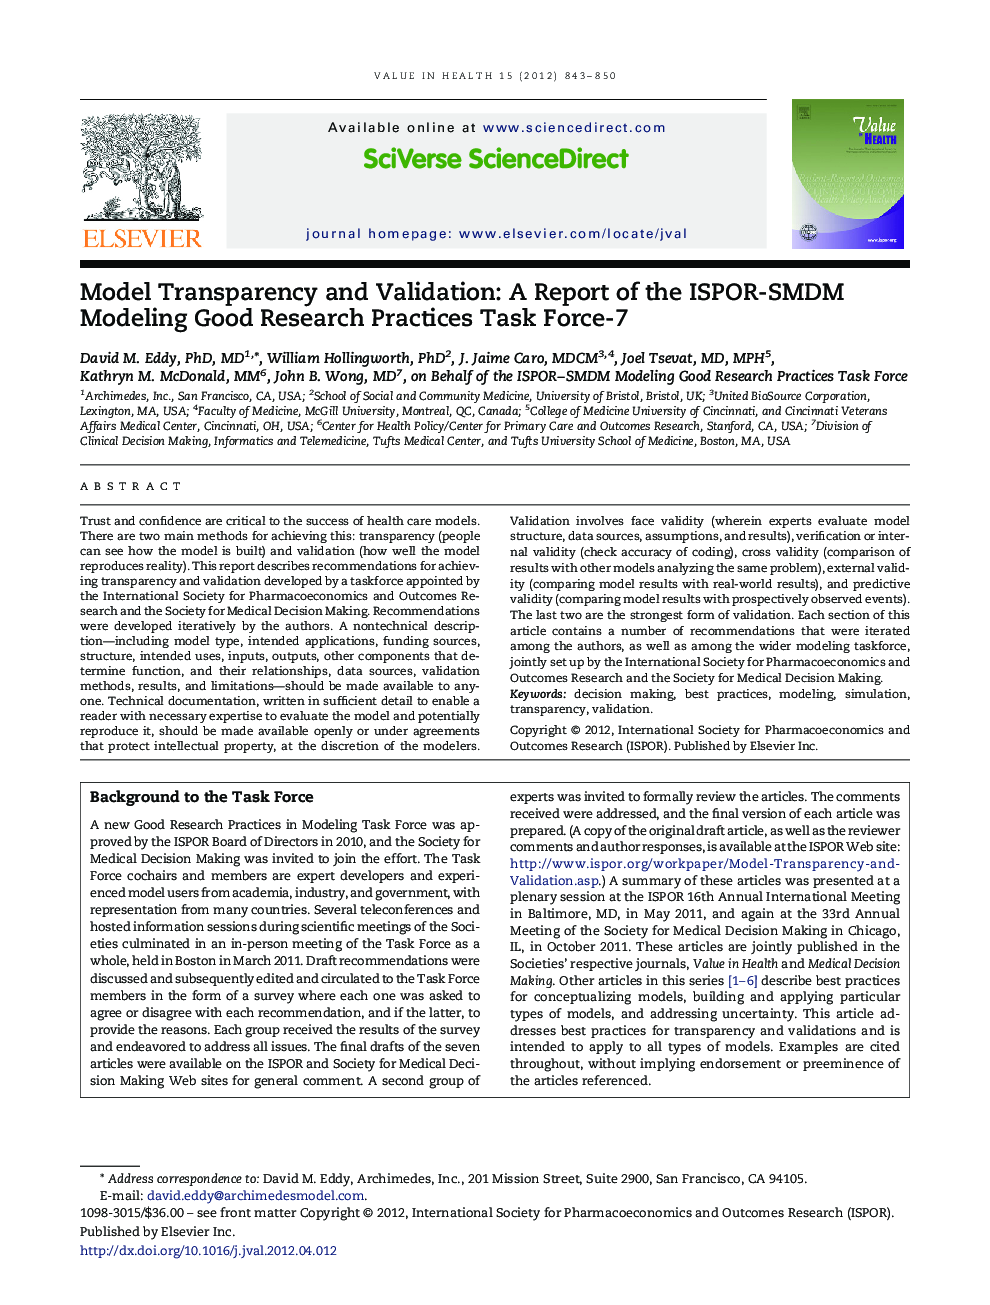 Model Transparency and Validation: A Report of the ISPOR-SMDM Modeling Good Research Practices Task Force-7